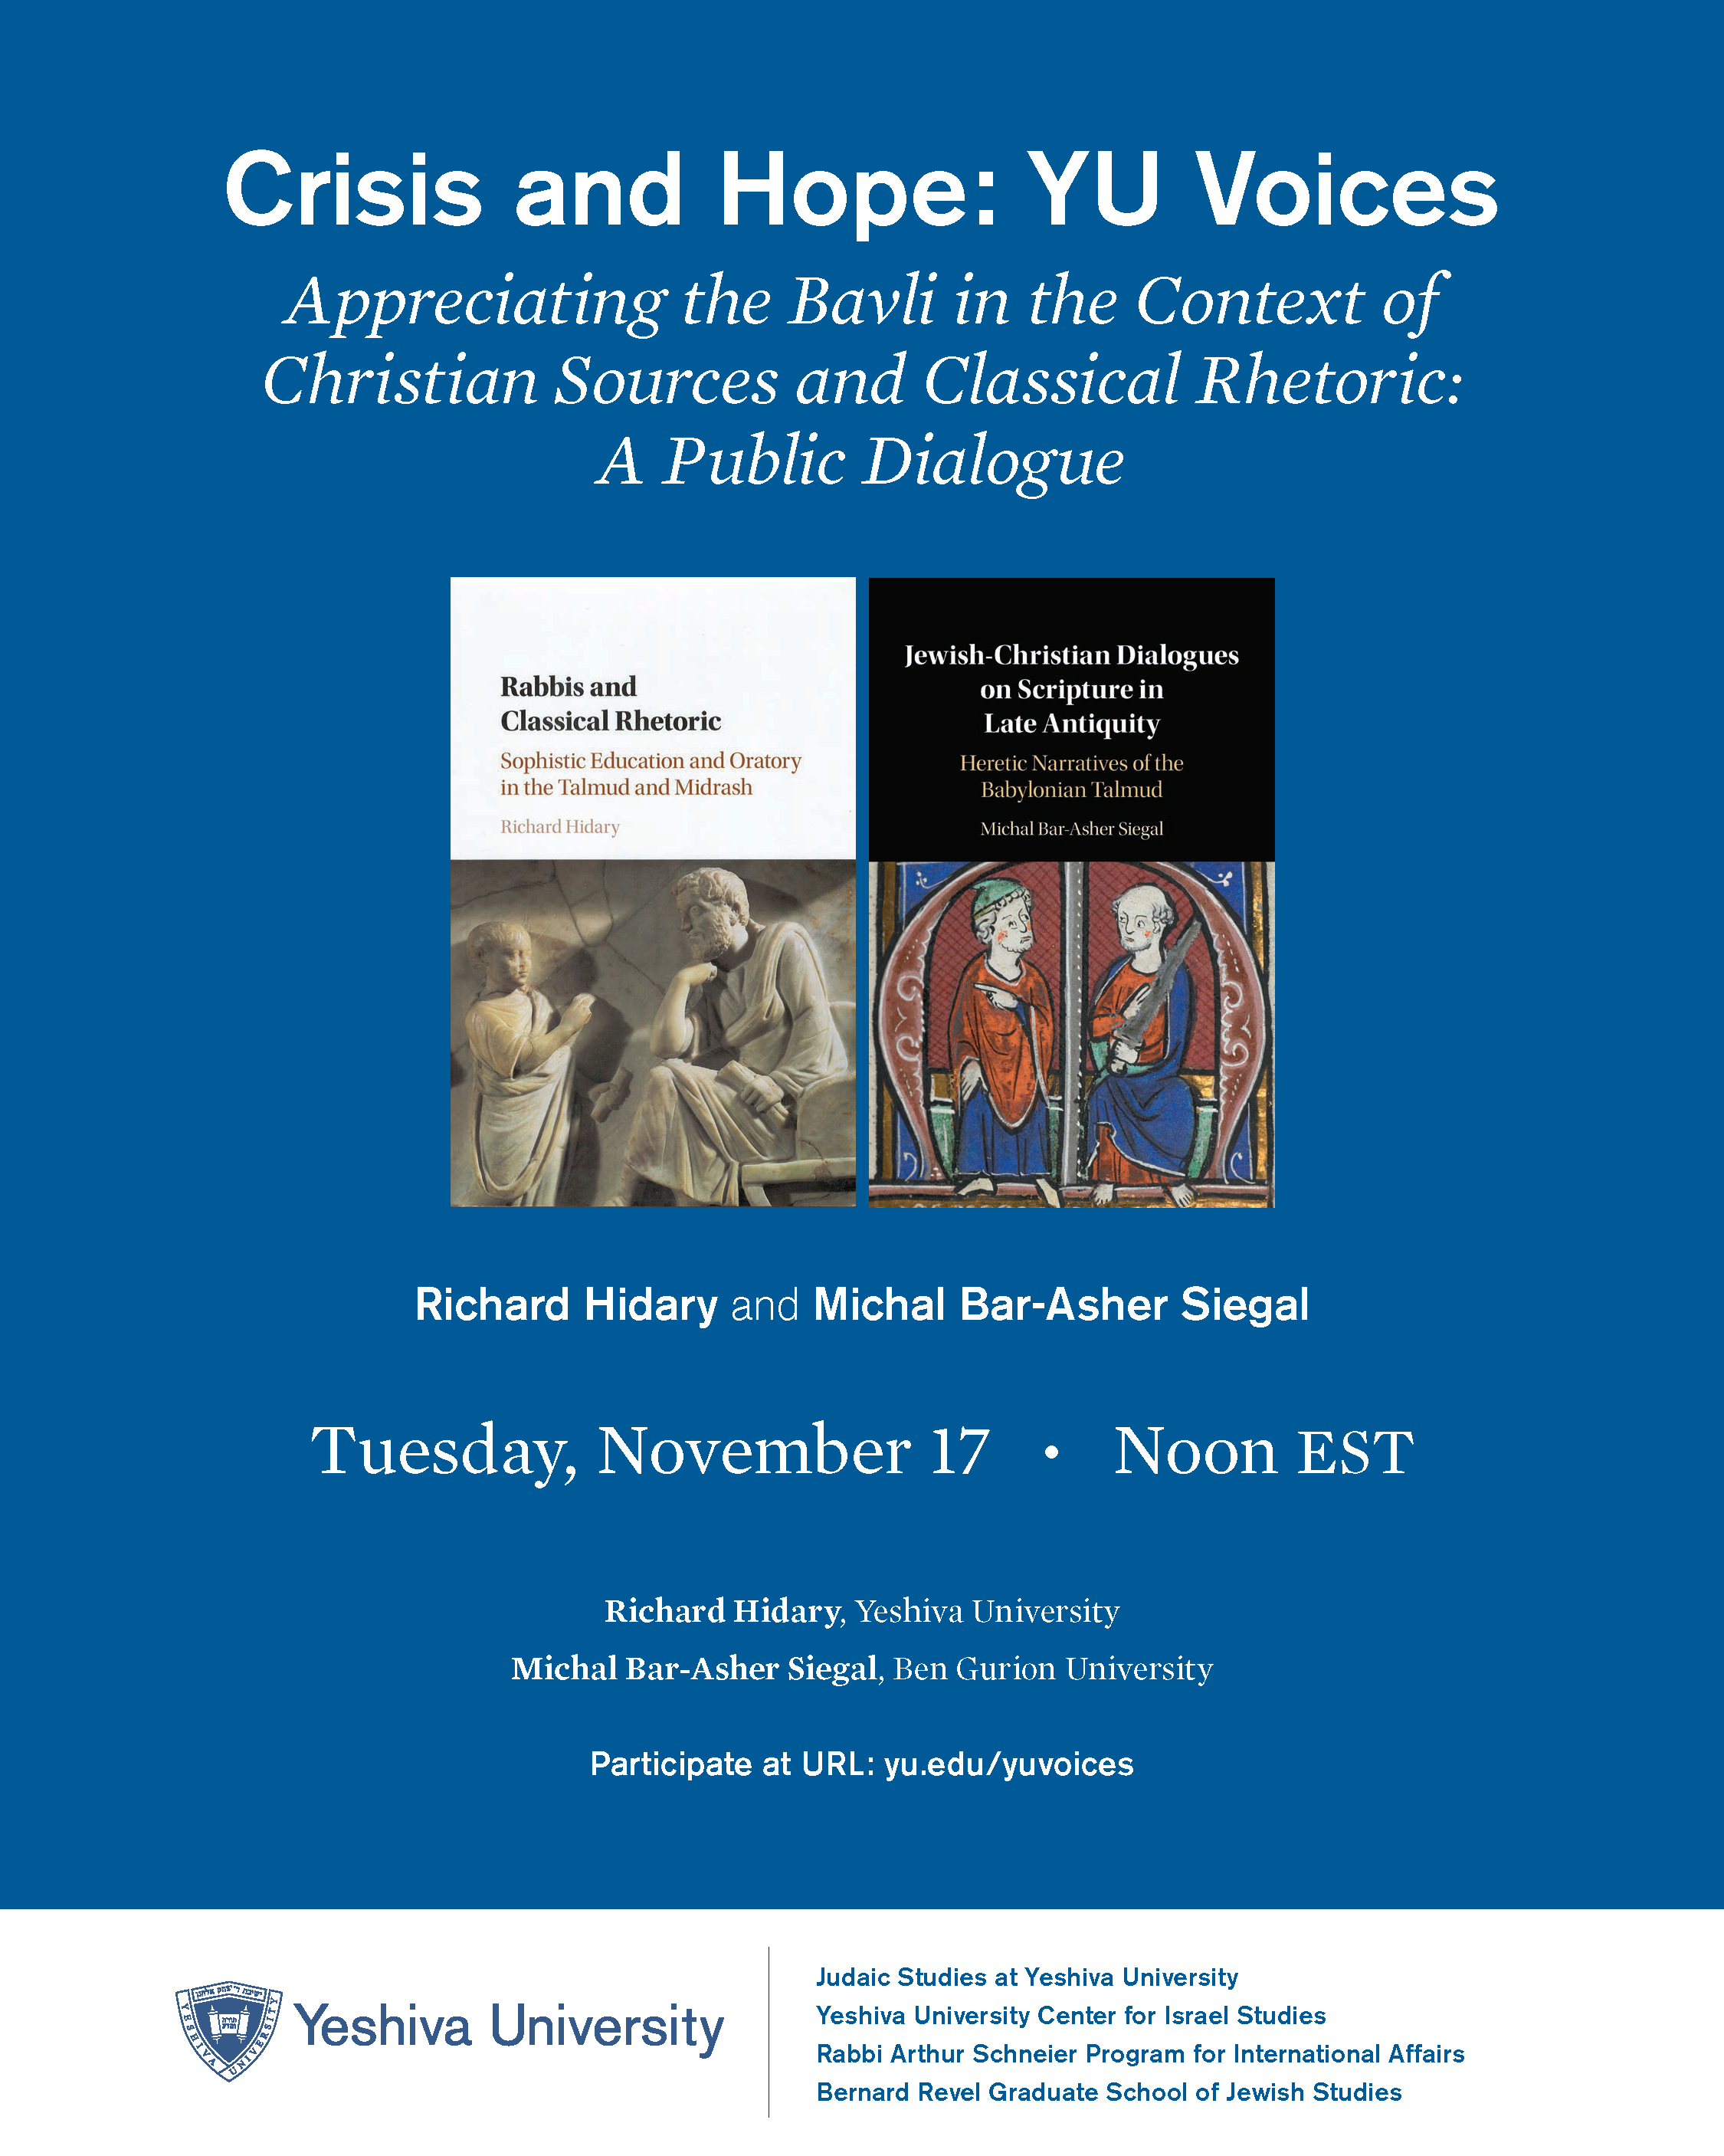 Crisis and Hope Appreciating the Bavli in the Context of Christian Sources and Classical Rhetoric:A Public Dialogue  Richard Hidary and Michal Bar-Asher Siegal Tuesday, November 17 • Noon EST Richard Hidary, Yeshiva University Michal Bar-Asher Siegal, Ben Gurion University Participate at URL: yu.edu/yuvoices